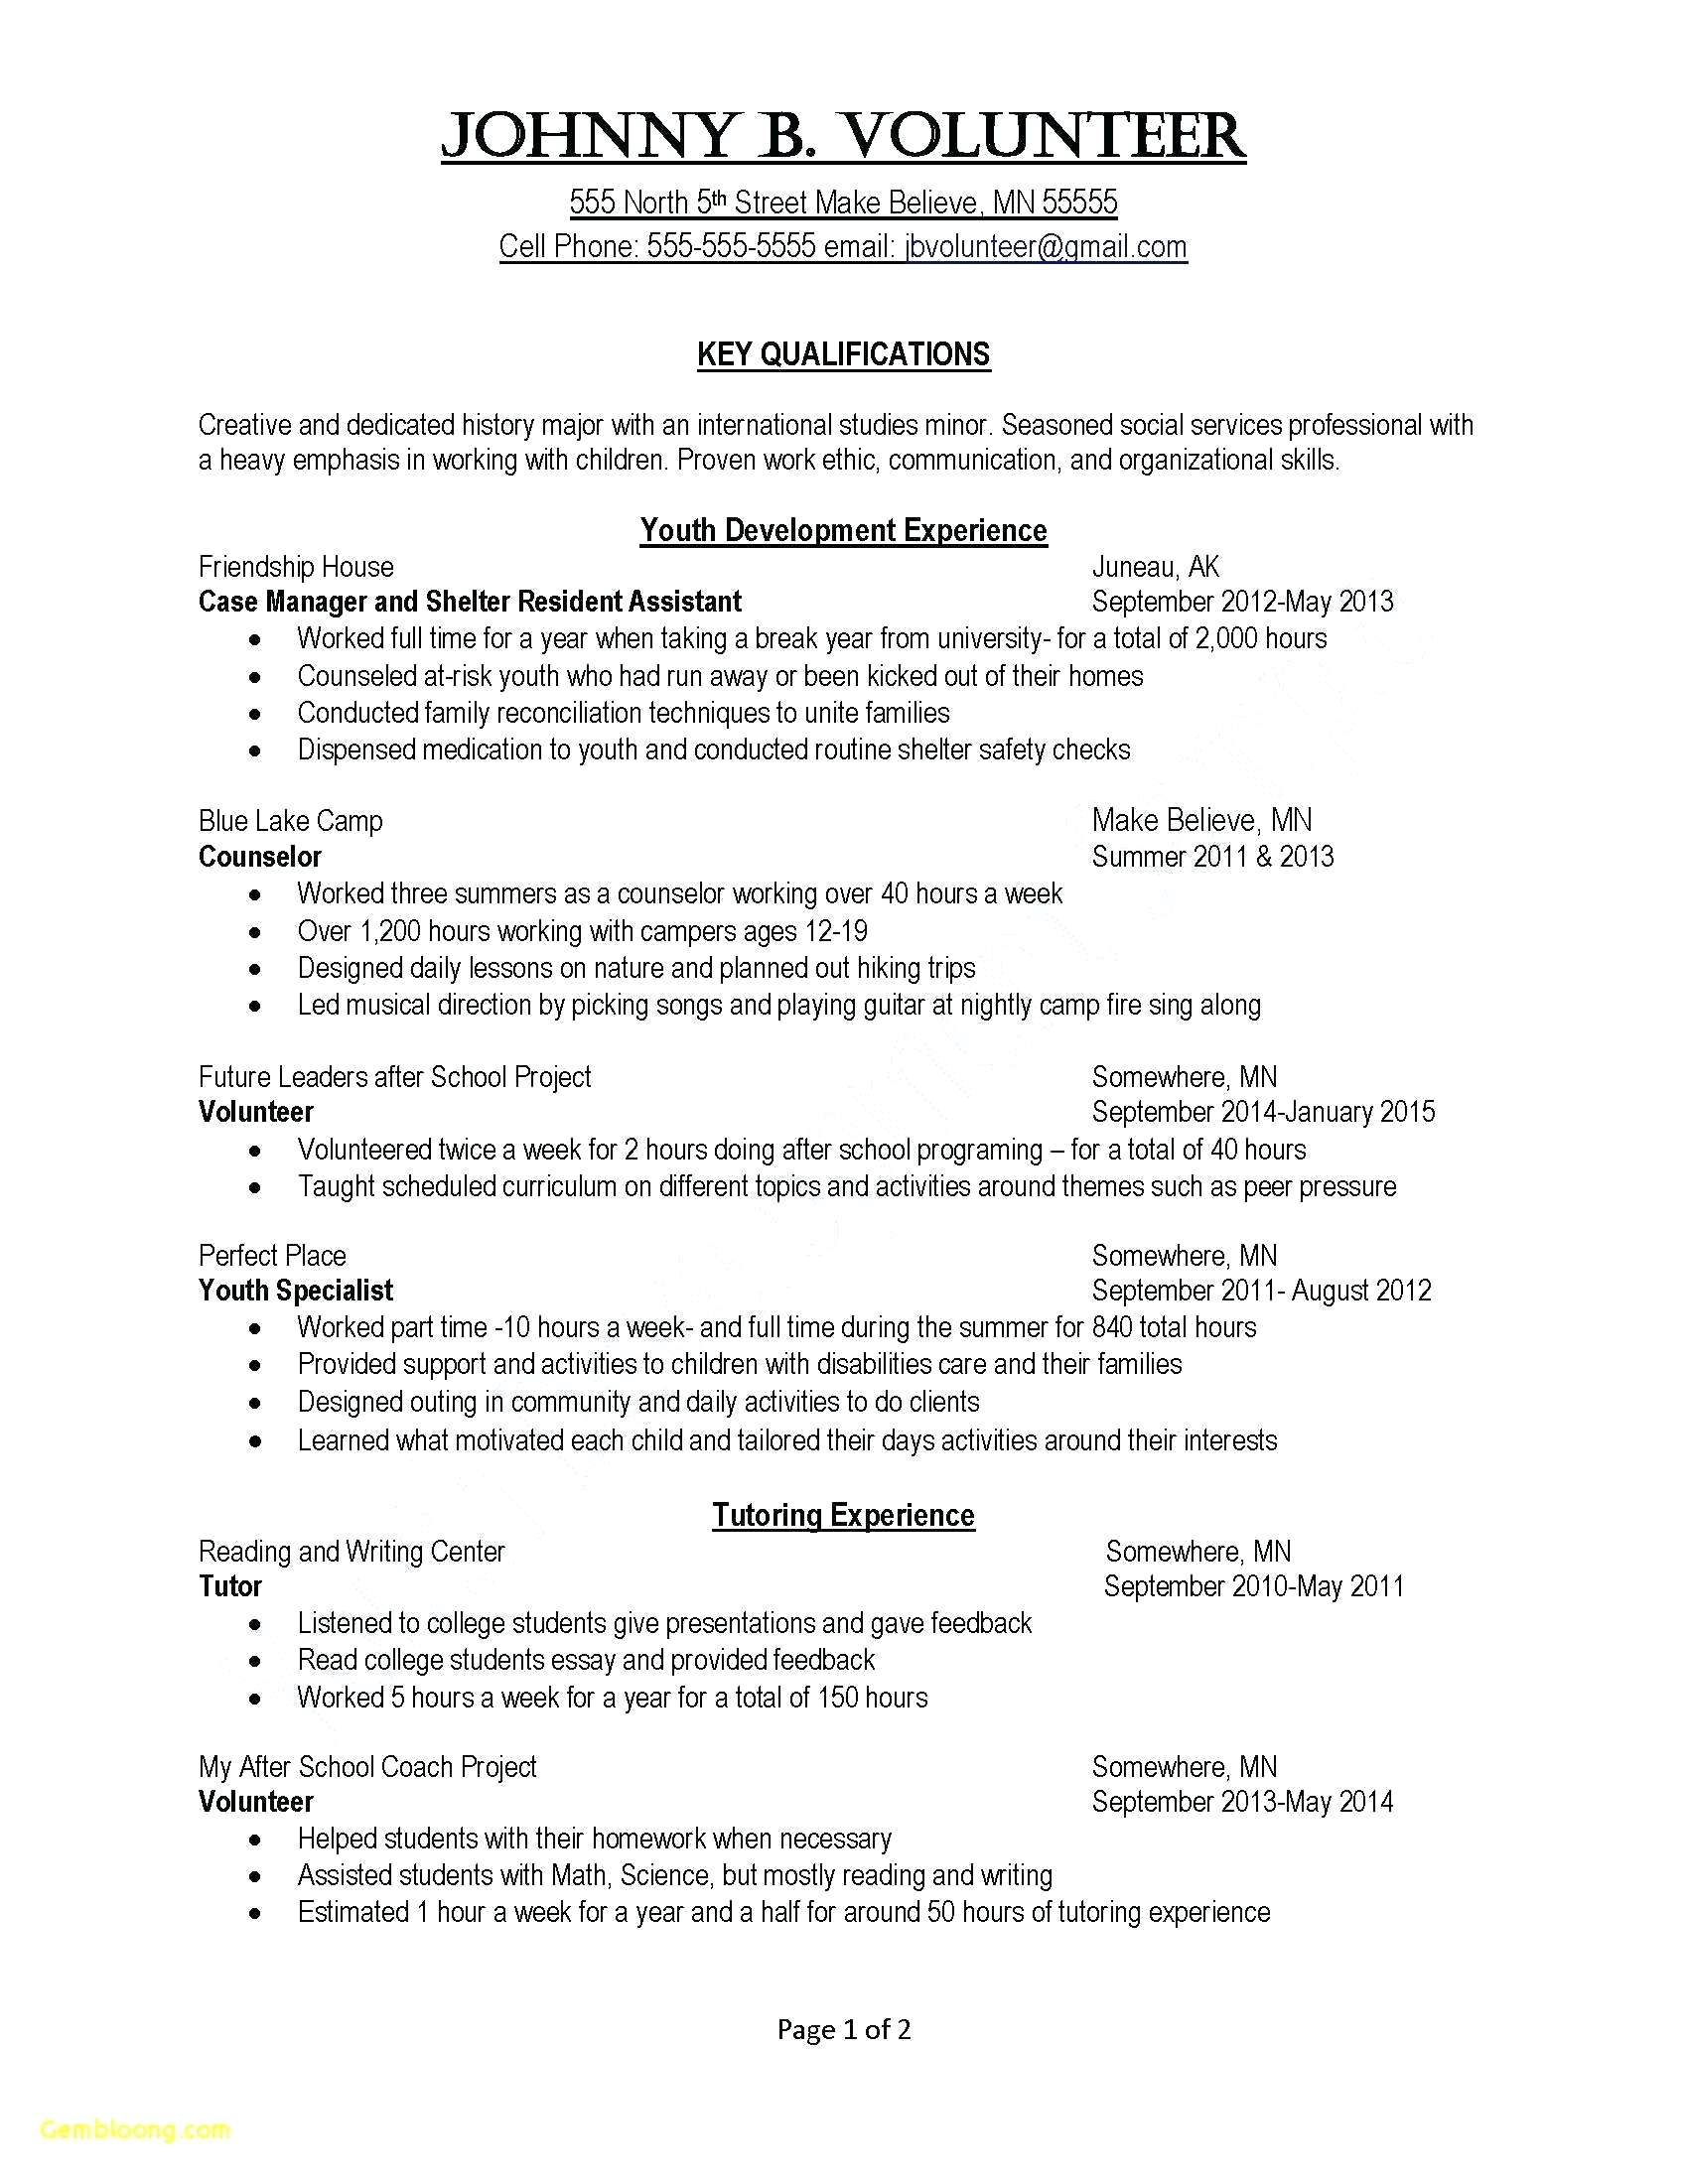 How To Type A Resume Entry Level Flight Attendant Resume Unique Writing A Job Cover Letter Sample Application Letters Social Worker Samples Free Template Word Reddit Attend 1 how to type a resume|wikiresume.com